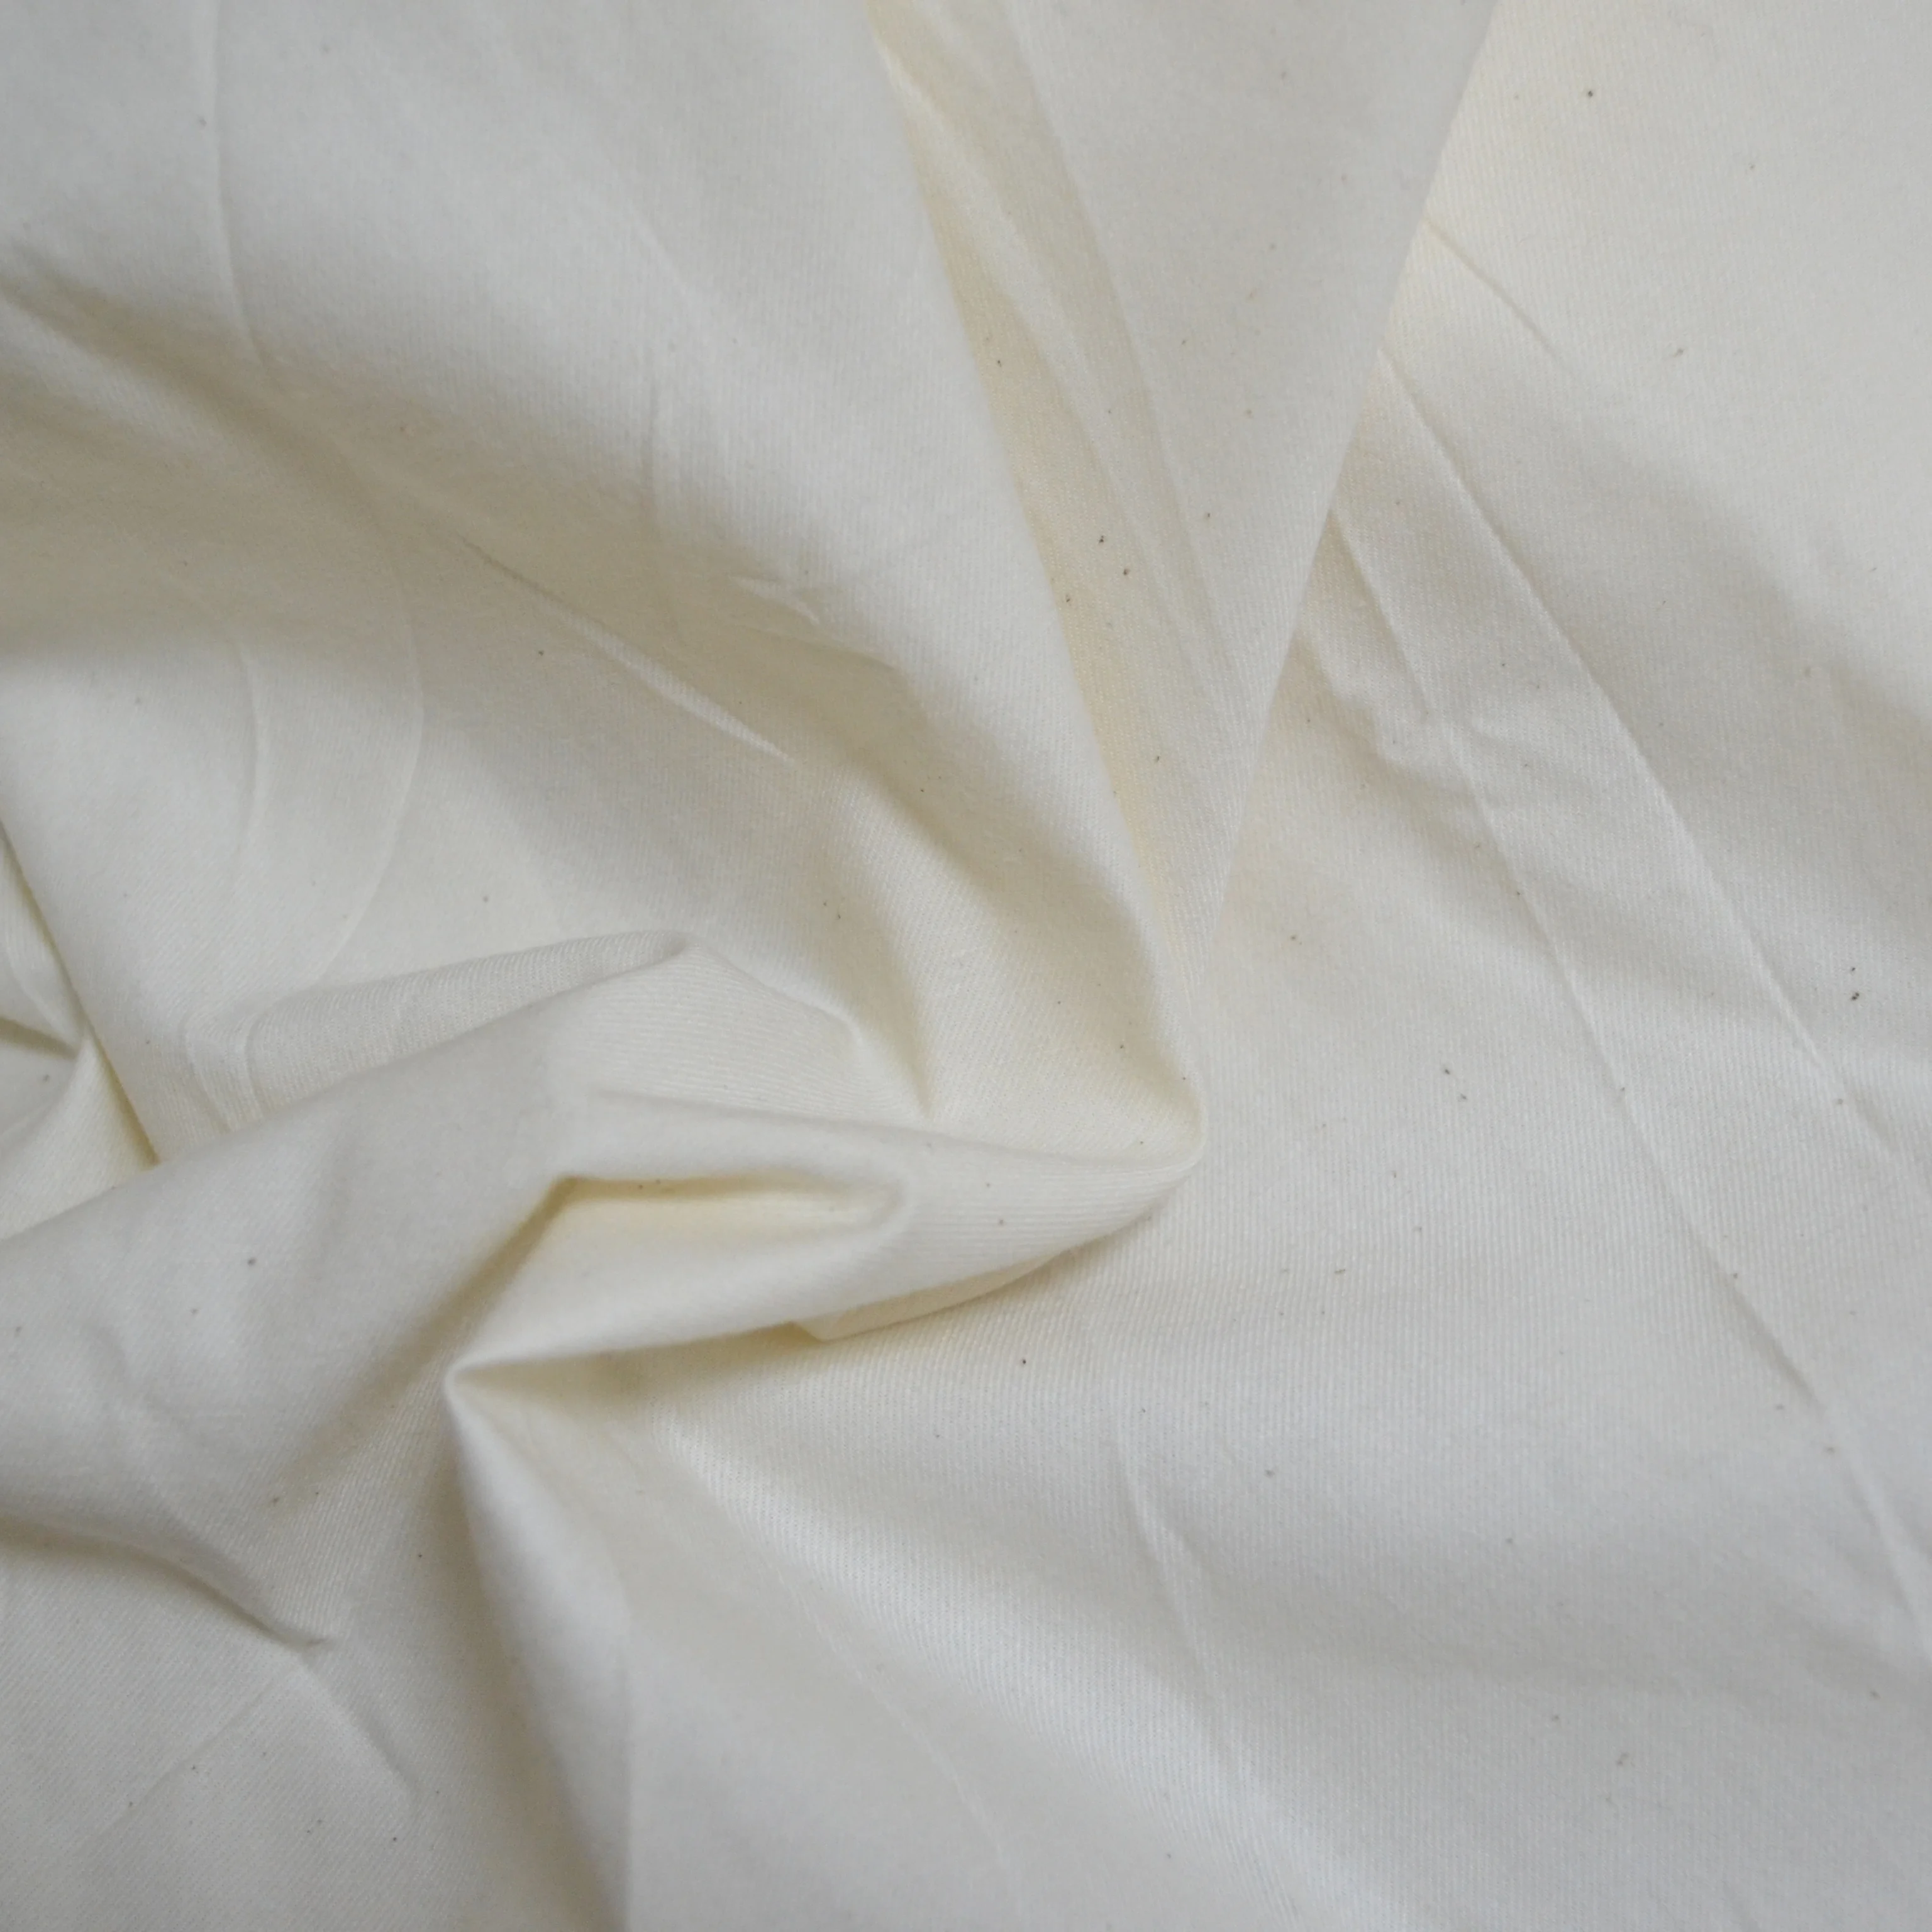 Tc poplin greige fabric combed quality workwear woven polyester 65% cotton 35% unbleached greige fabrics